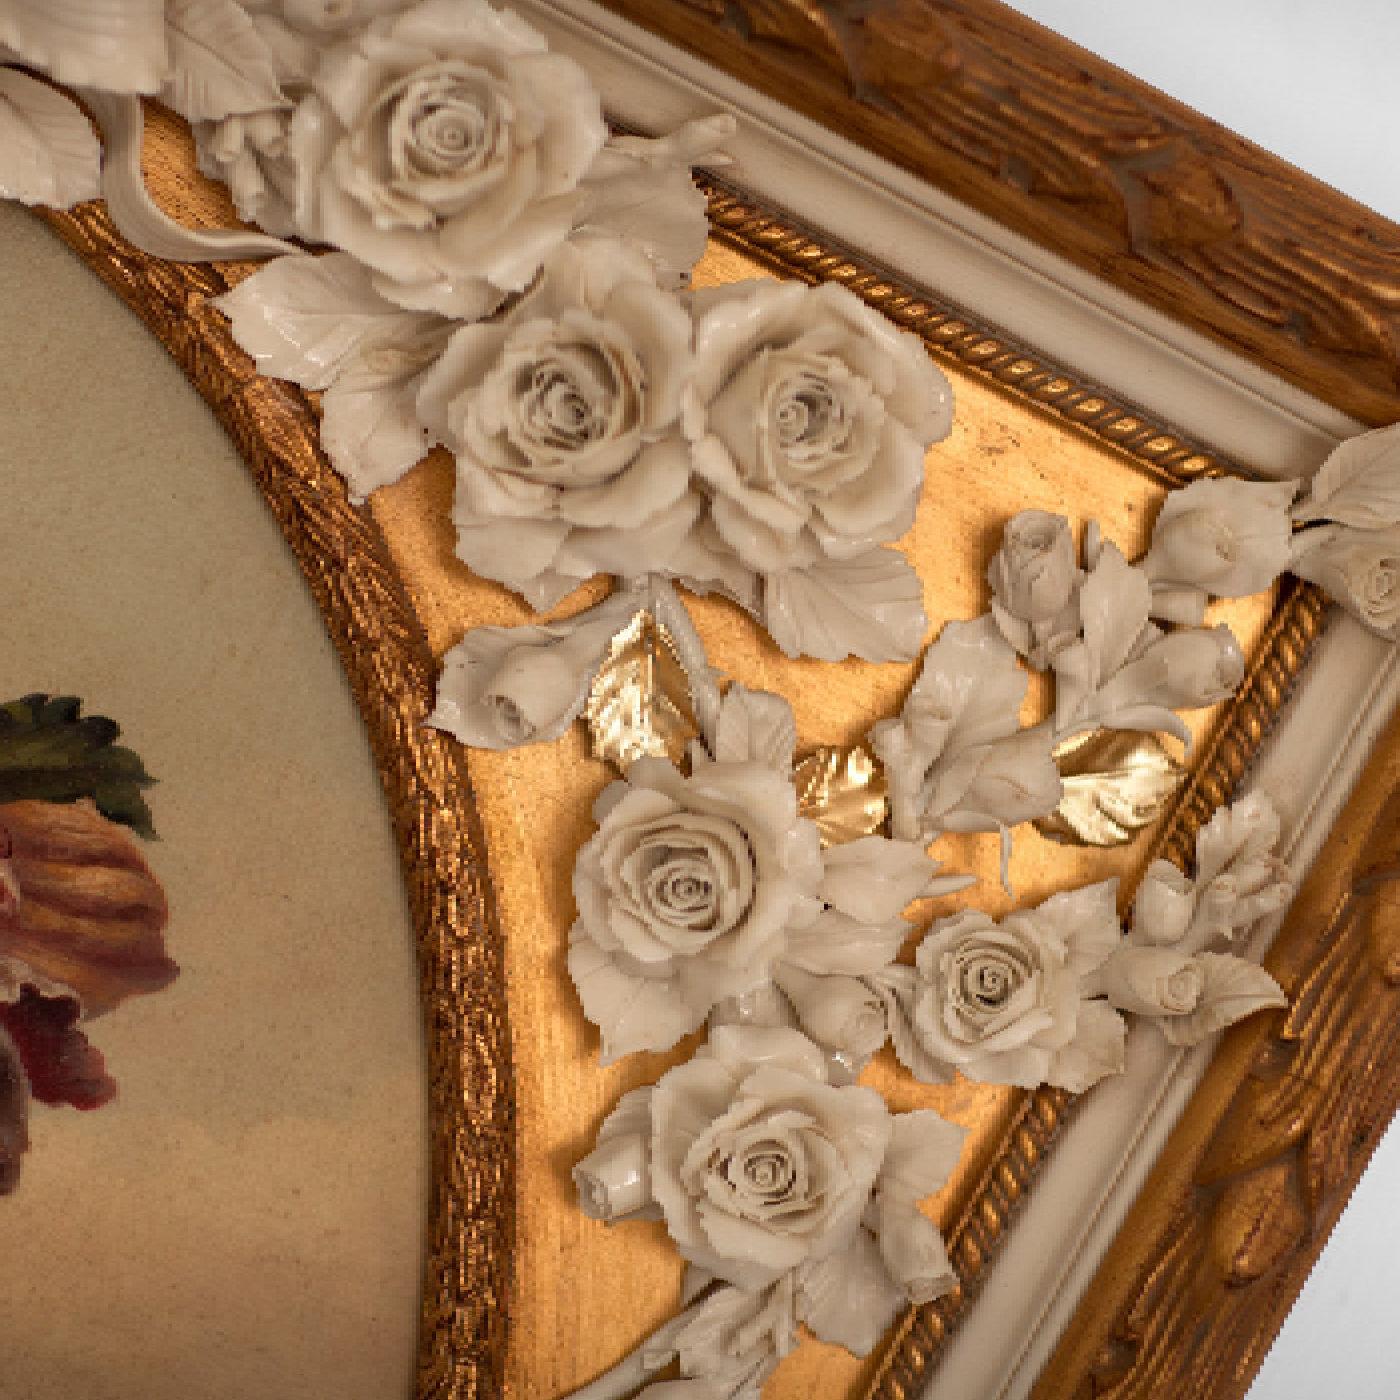 A captivating showcase of deft Italian porcelain and wood engraving tradition, this magnificent frame will effortlessly adorn any classic or modern interior alike. Handcrafted of wood enhanced with a burnished gold finish, it is uniquely enriched